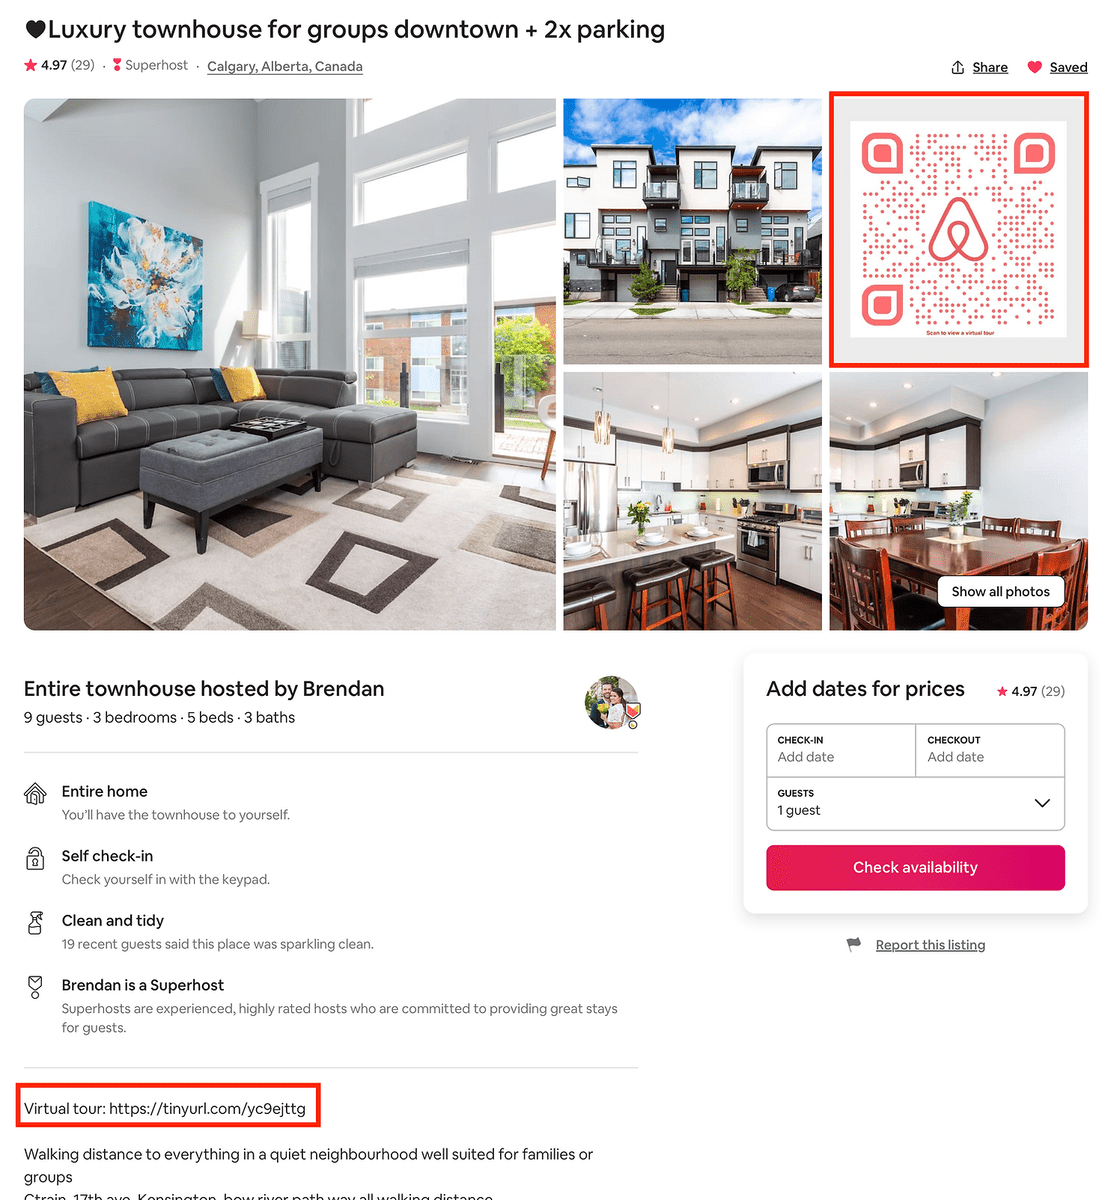 Airbnb uses virtual videos for better conversions